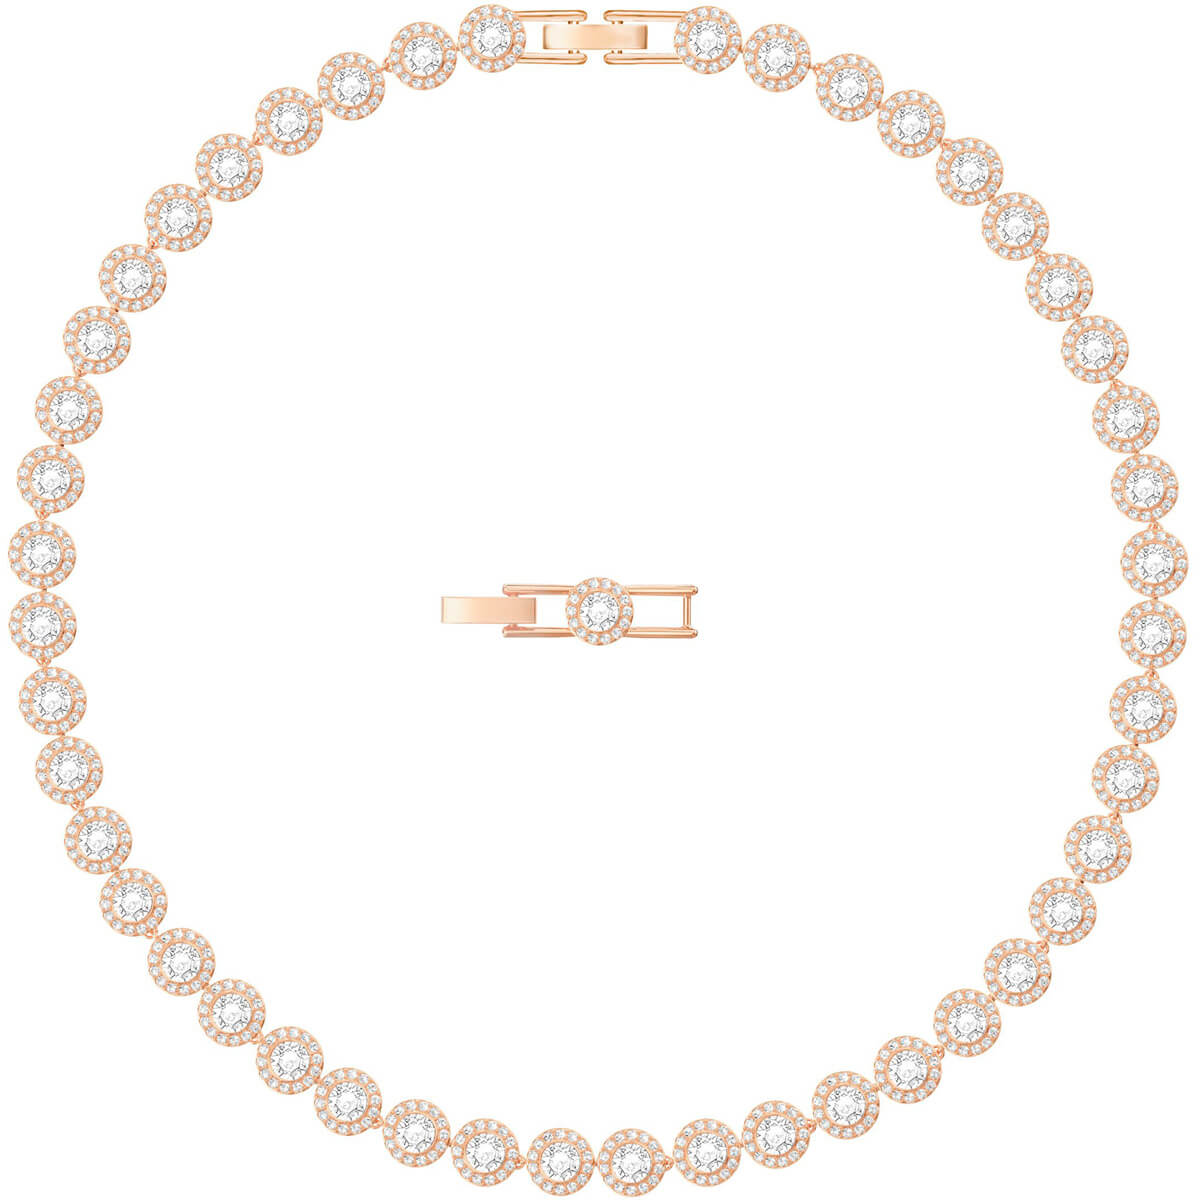 Photos - Pendant / Choker Necklace Swarovski Angelic All Around Necklace - White with Rose Gold Plating 